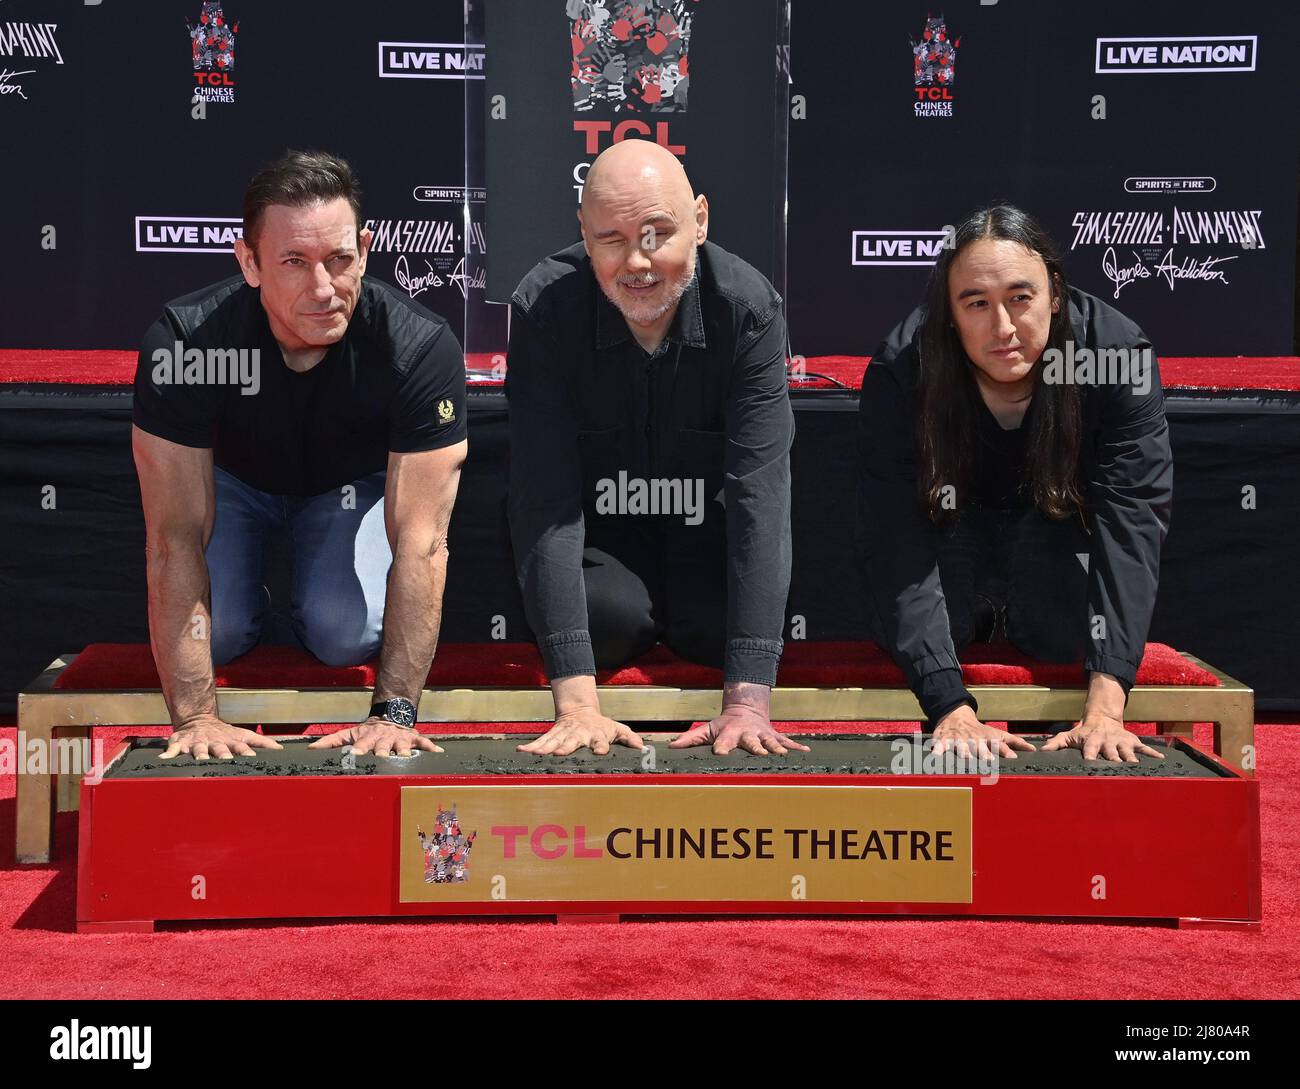 Los Angeles, United States. 11th May, 2022. Three members of the alternative rock band The Smashing Pumpkins, Jimmy Chamberlin, Billy Corgan, and Jeff Schroeder (L-R) participate in a handprint ceremony immortalizing them in the forecourt of the TCL Chinese Theatre (formerly Grauman's) in the Hollywood section of Los Angeles on Wednesday, May 11, 2022. Photo by Jim Ruymen/UPI Credit: UPI/Alamy Live News Stock Photo